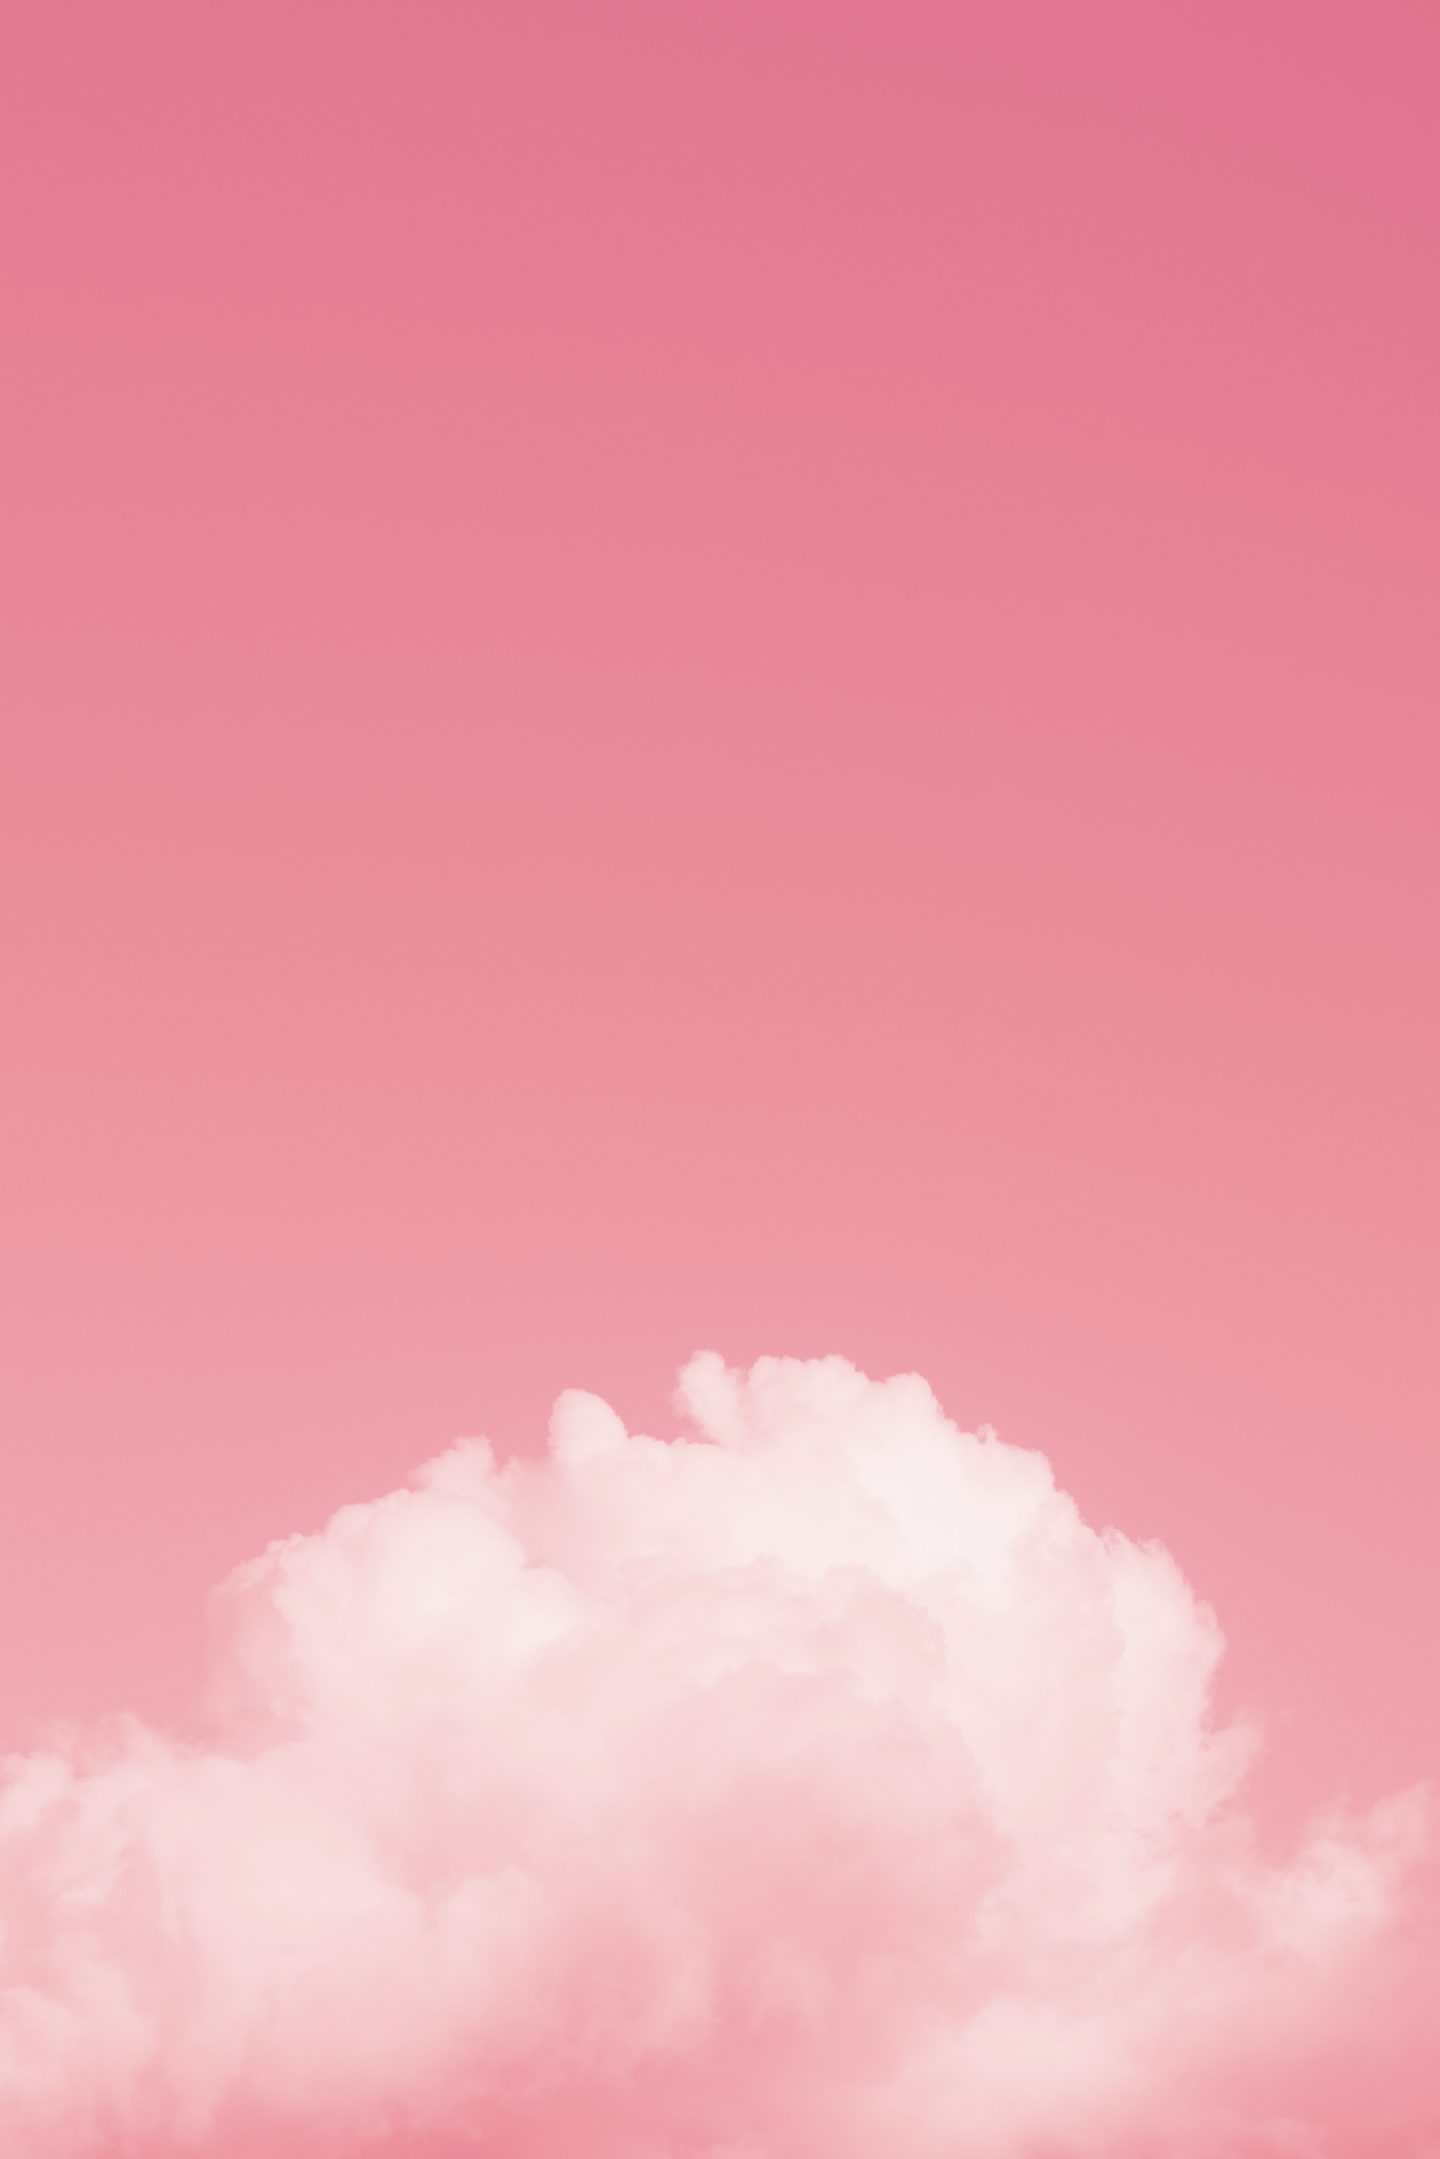 A pink sky with a white cloud - Pink phone